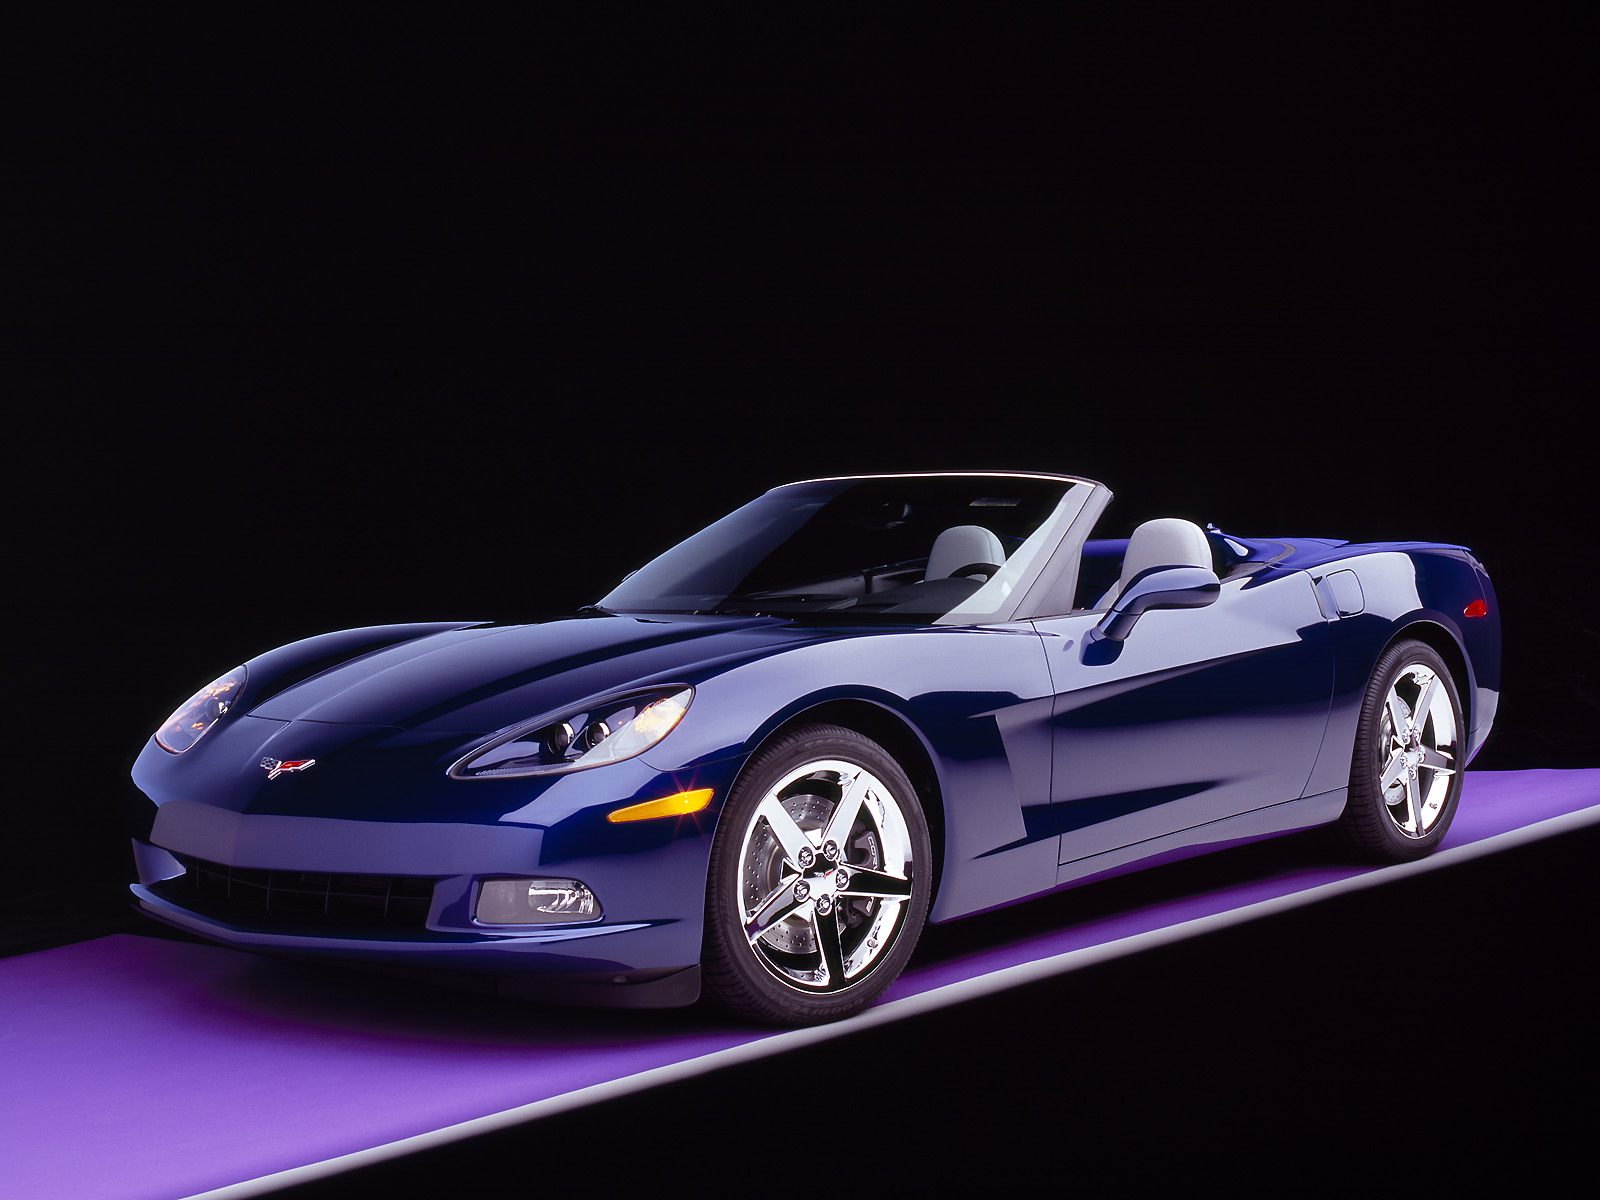 Chevrolet Corvette Car Huge Collection Of Amazing High Resolution